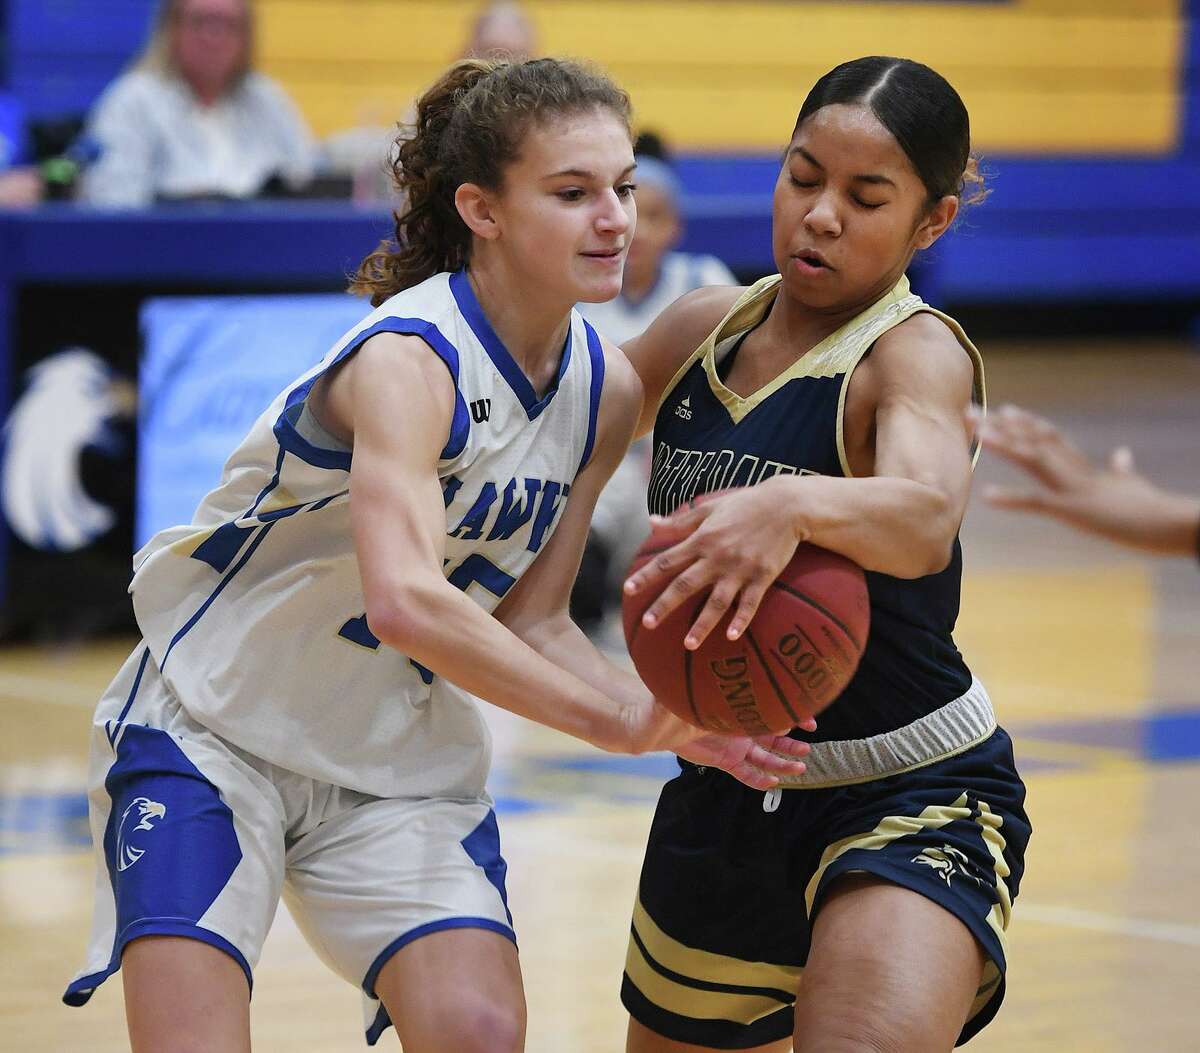 Newtown's Emma Magazu, left, is tied up by Notre Dame of Fairfield defender Aizhanique Mayo during the first half of their SWC girls basketball game at Newtown High School in Newtown, Conn. on Thursday, January 23, 2020.